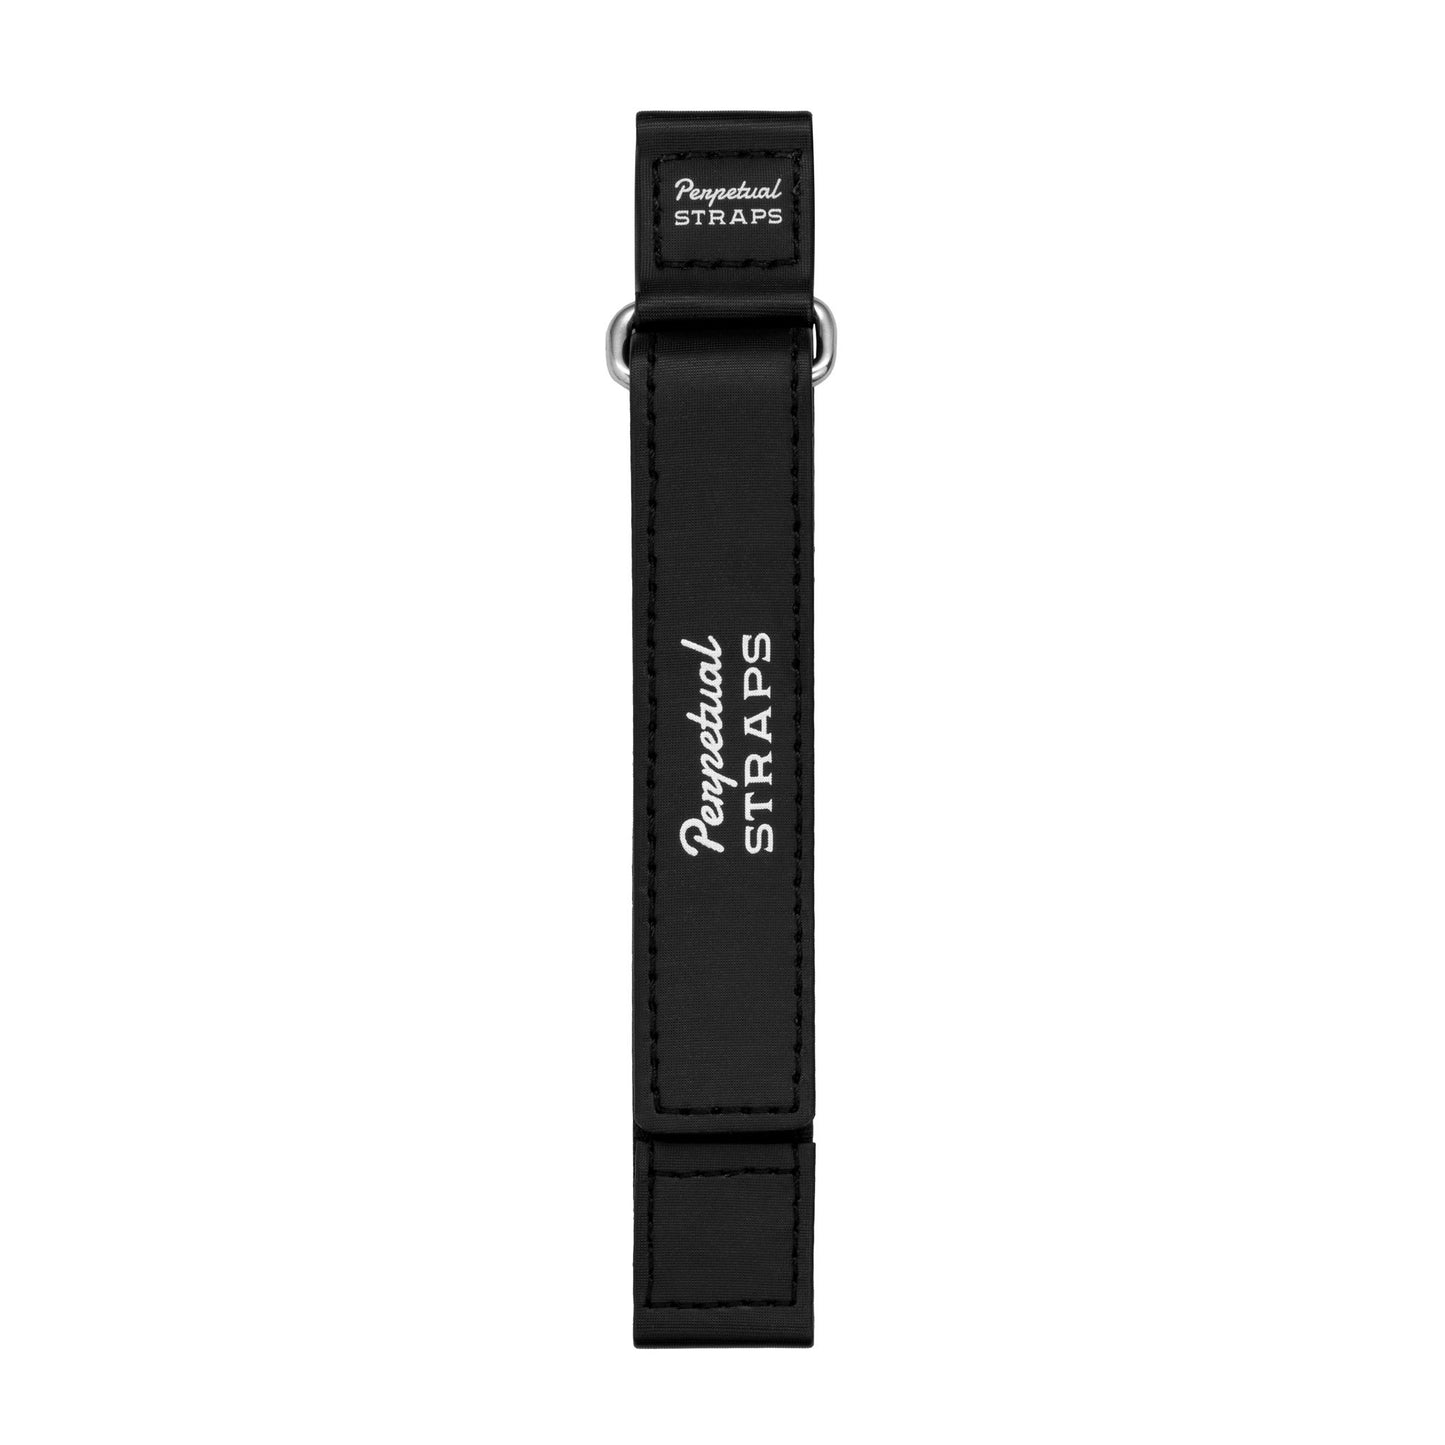 BLACK VELCRO - PREMIUM FABRIC WATCH STRAP for MOST WATCHES WITH A 20MM LUG WIDTH